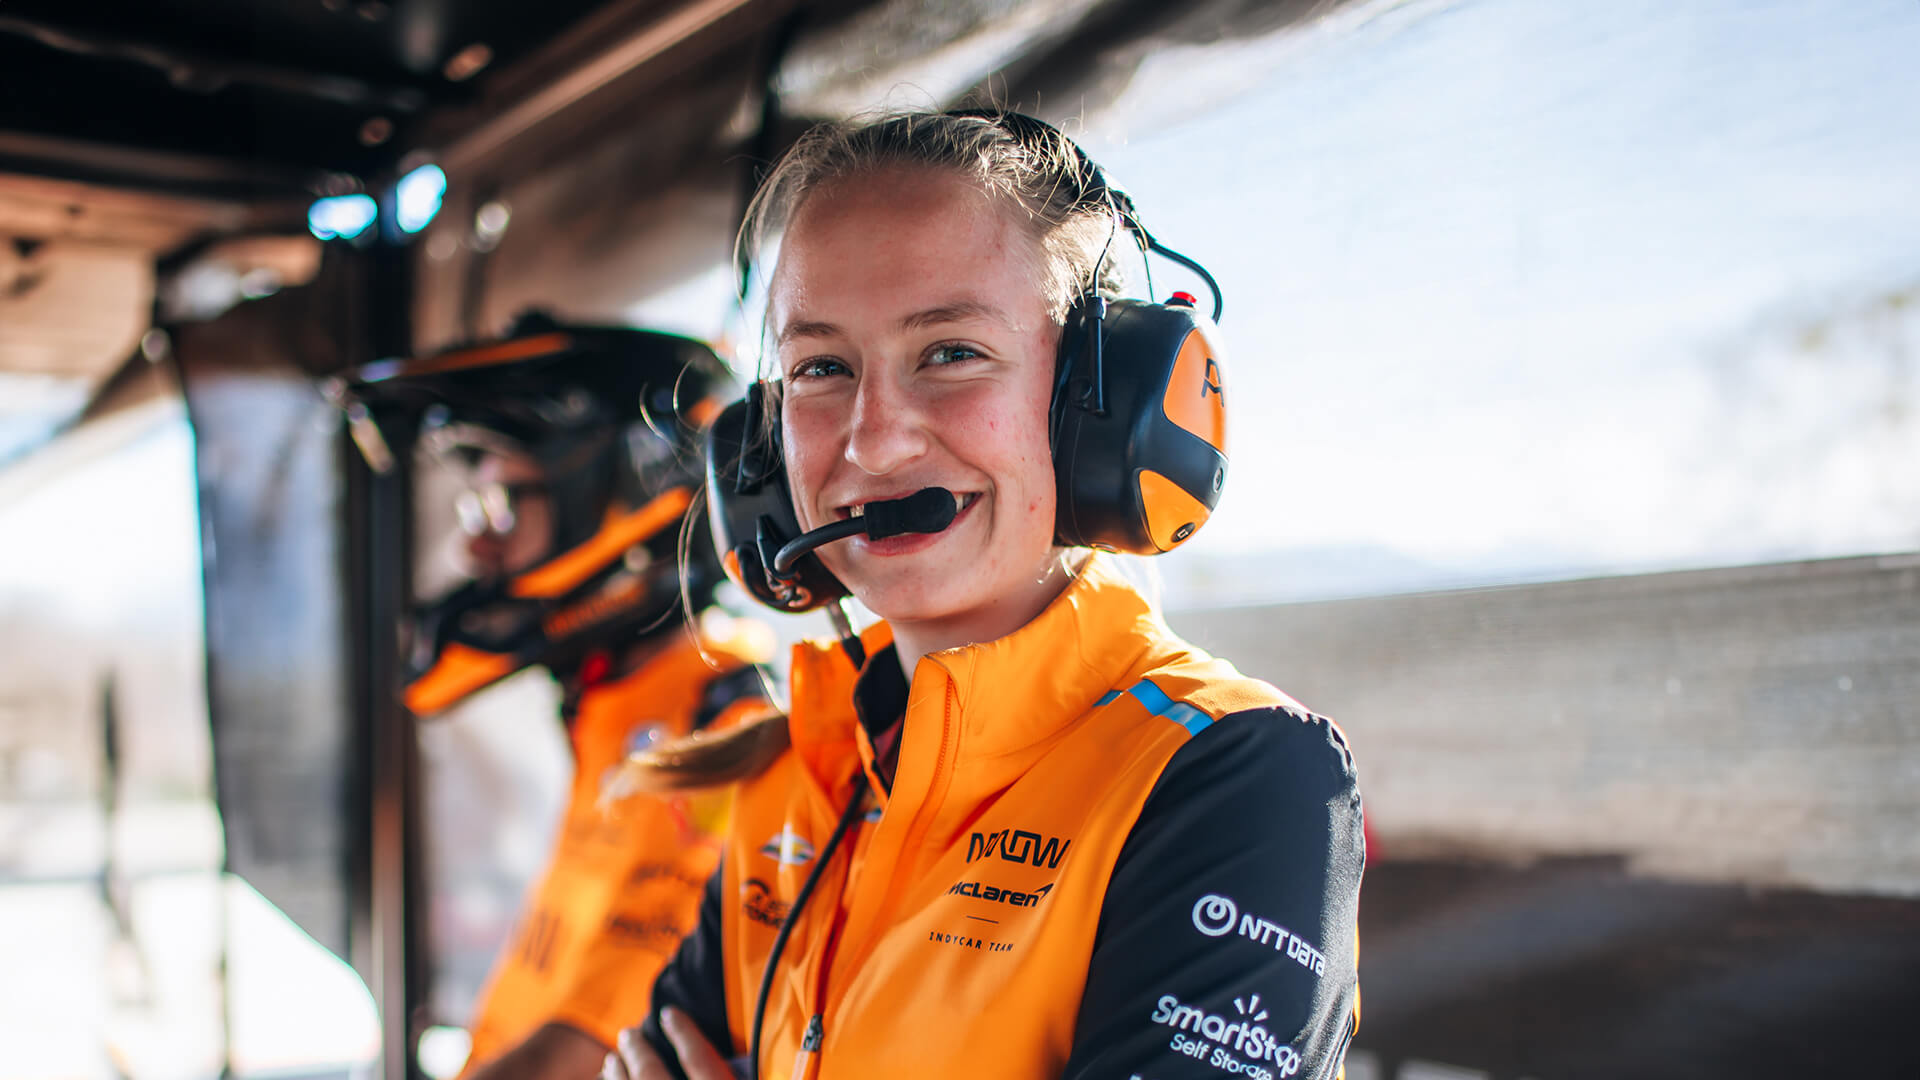 Motorsports engineering alumna Lizzie Todd, a systems engineer for the Arrow McLaren IndyCar Team